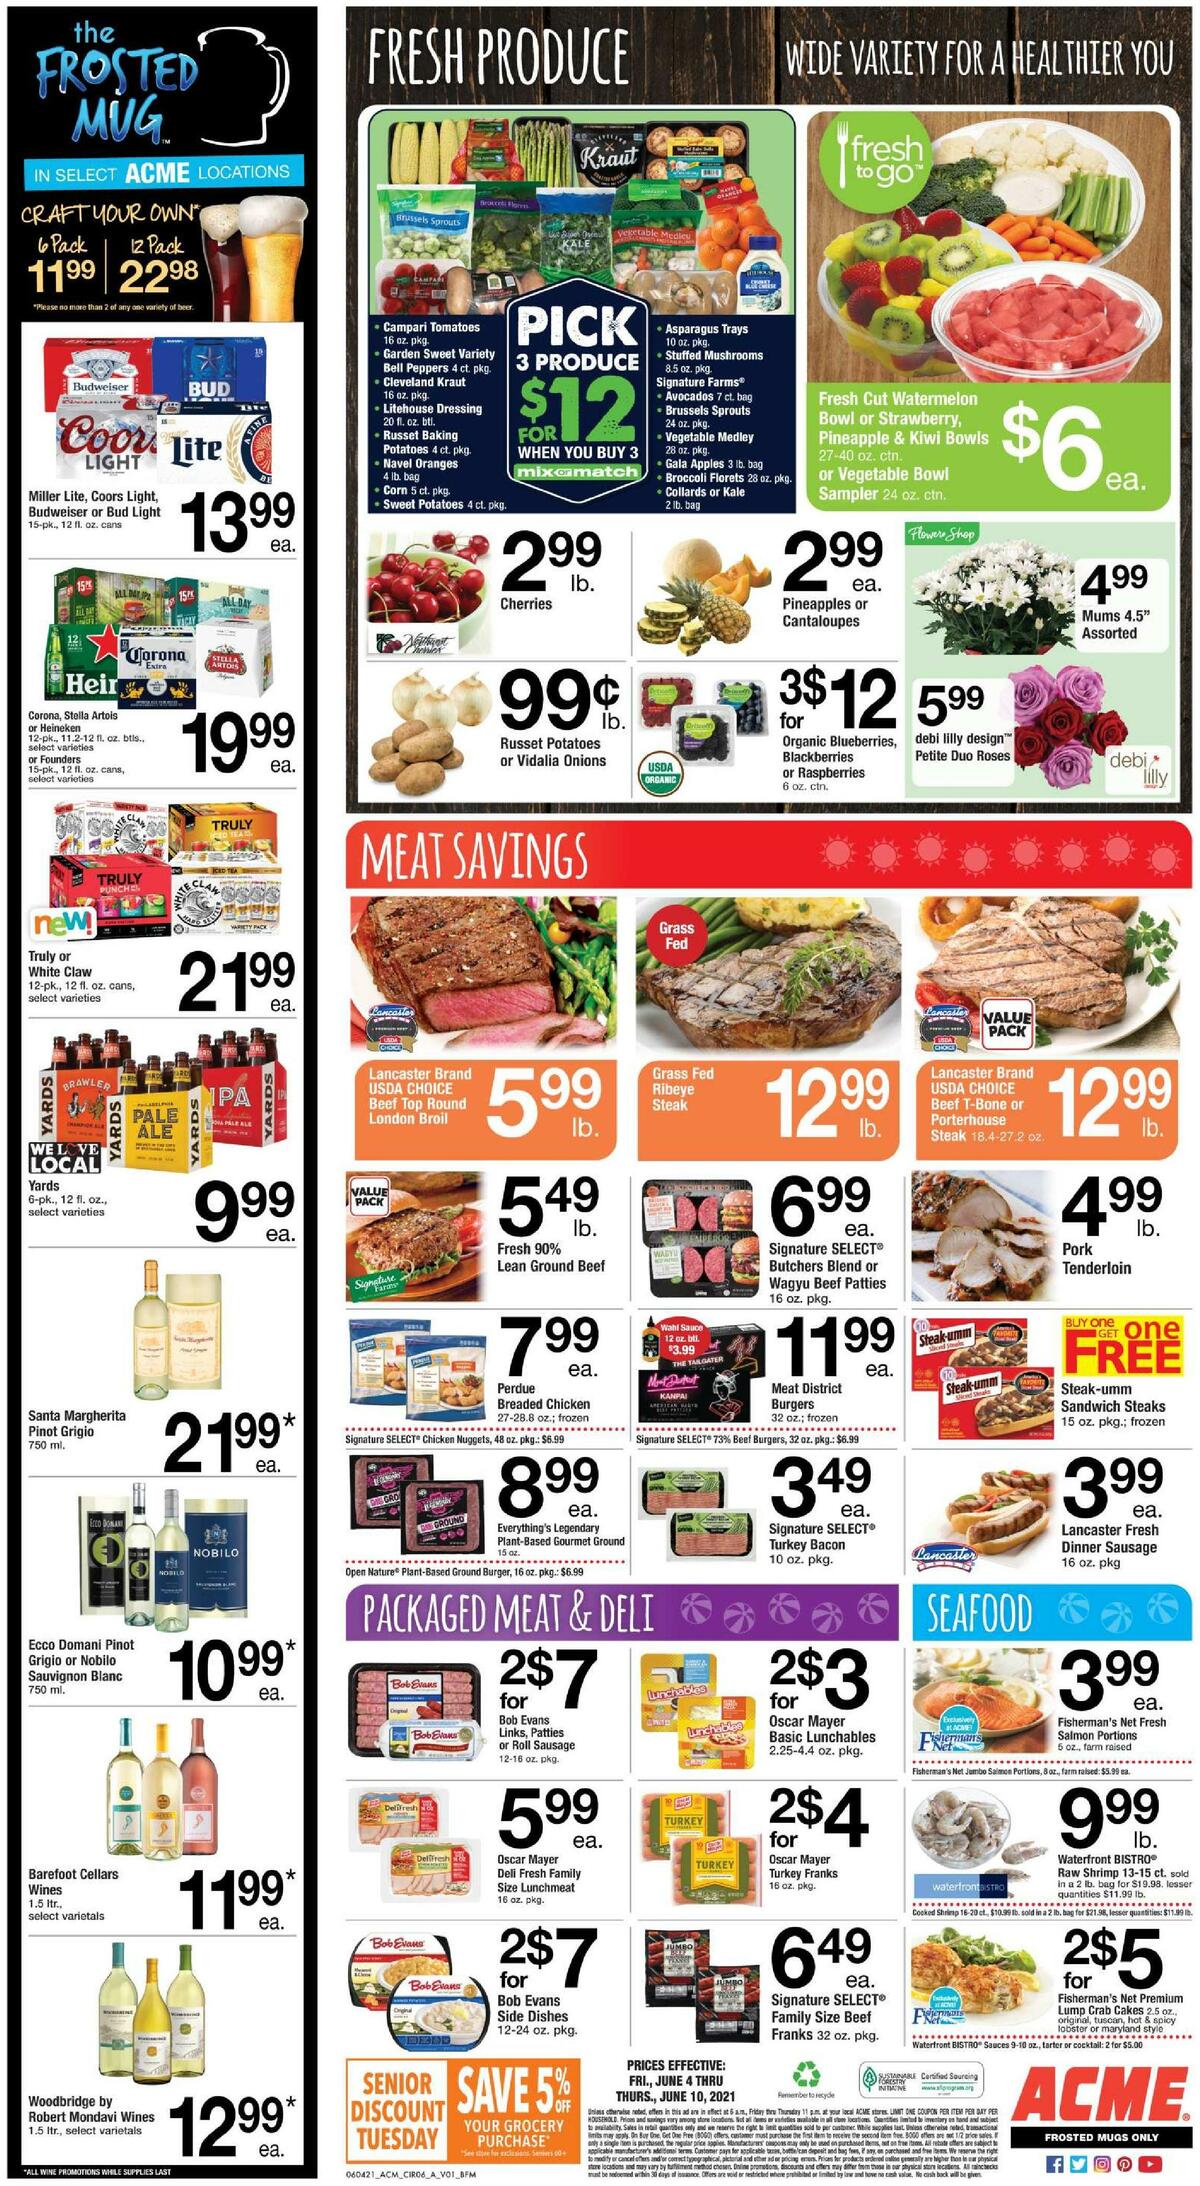 ACME Markets Weekly Ad from June 4